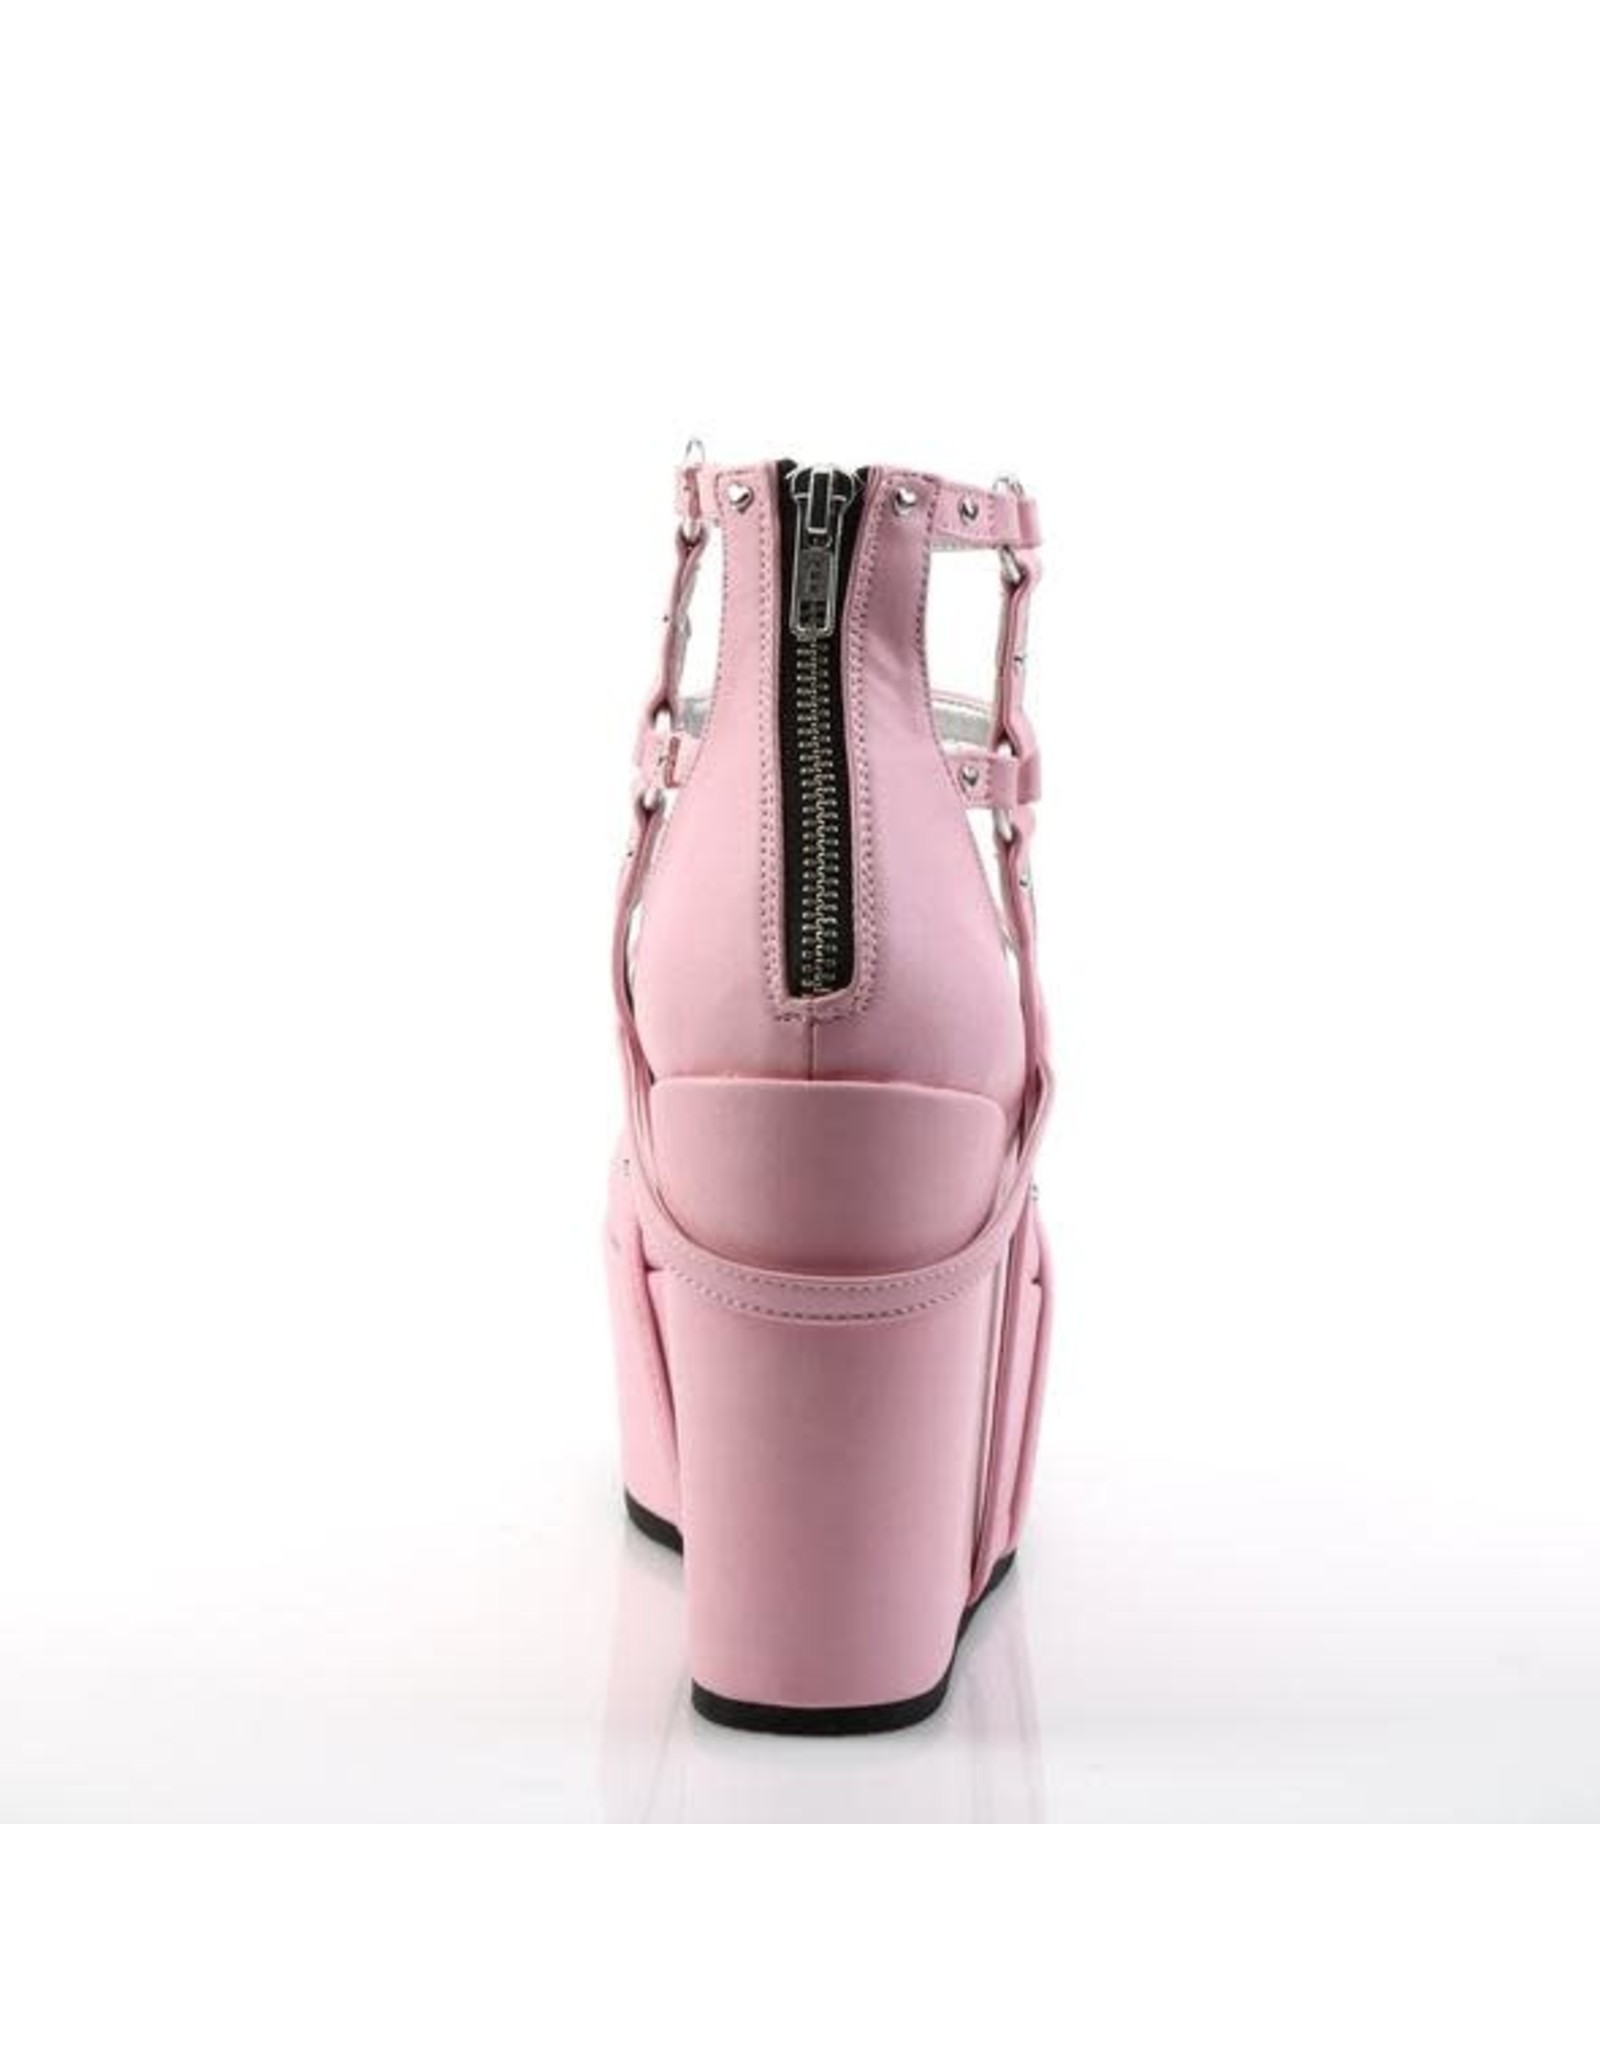 POISON-25-2 5" Wedge Platform Pink Vegan Leather Cage Bootie + Heart Studding, O-Rings & Heart-Shaped Locket D34PVC